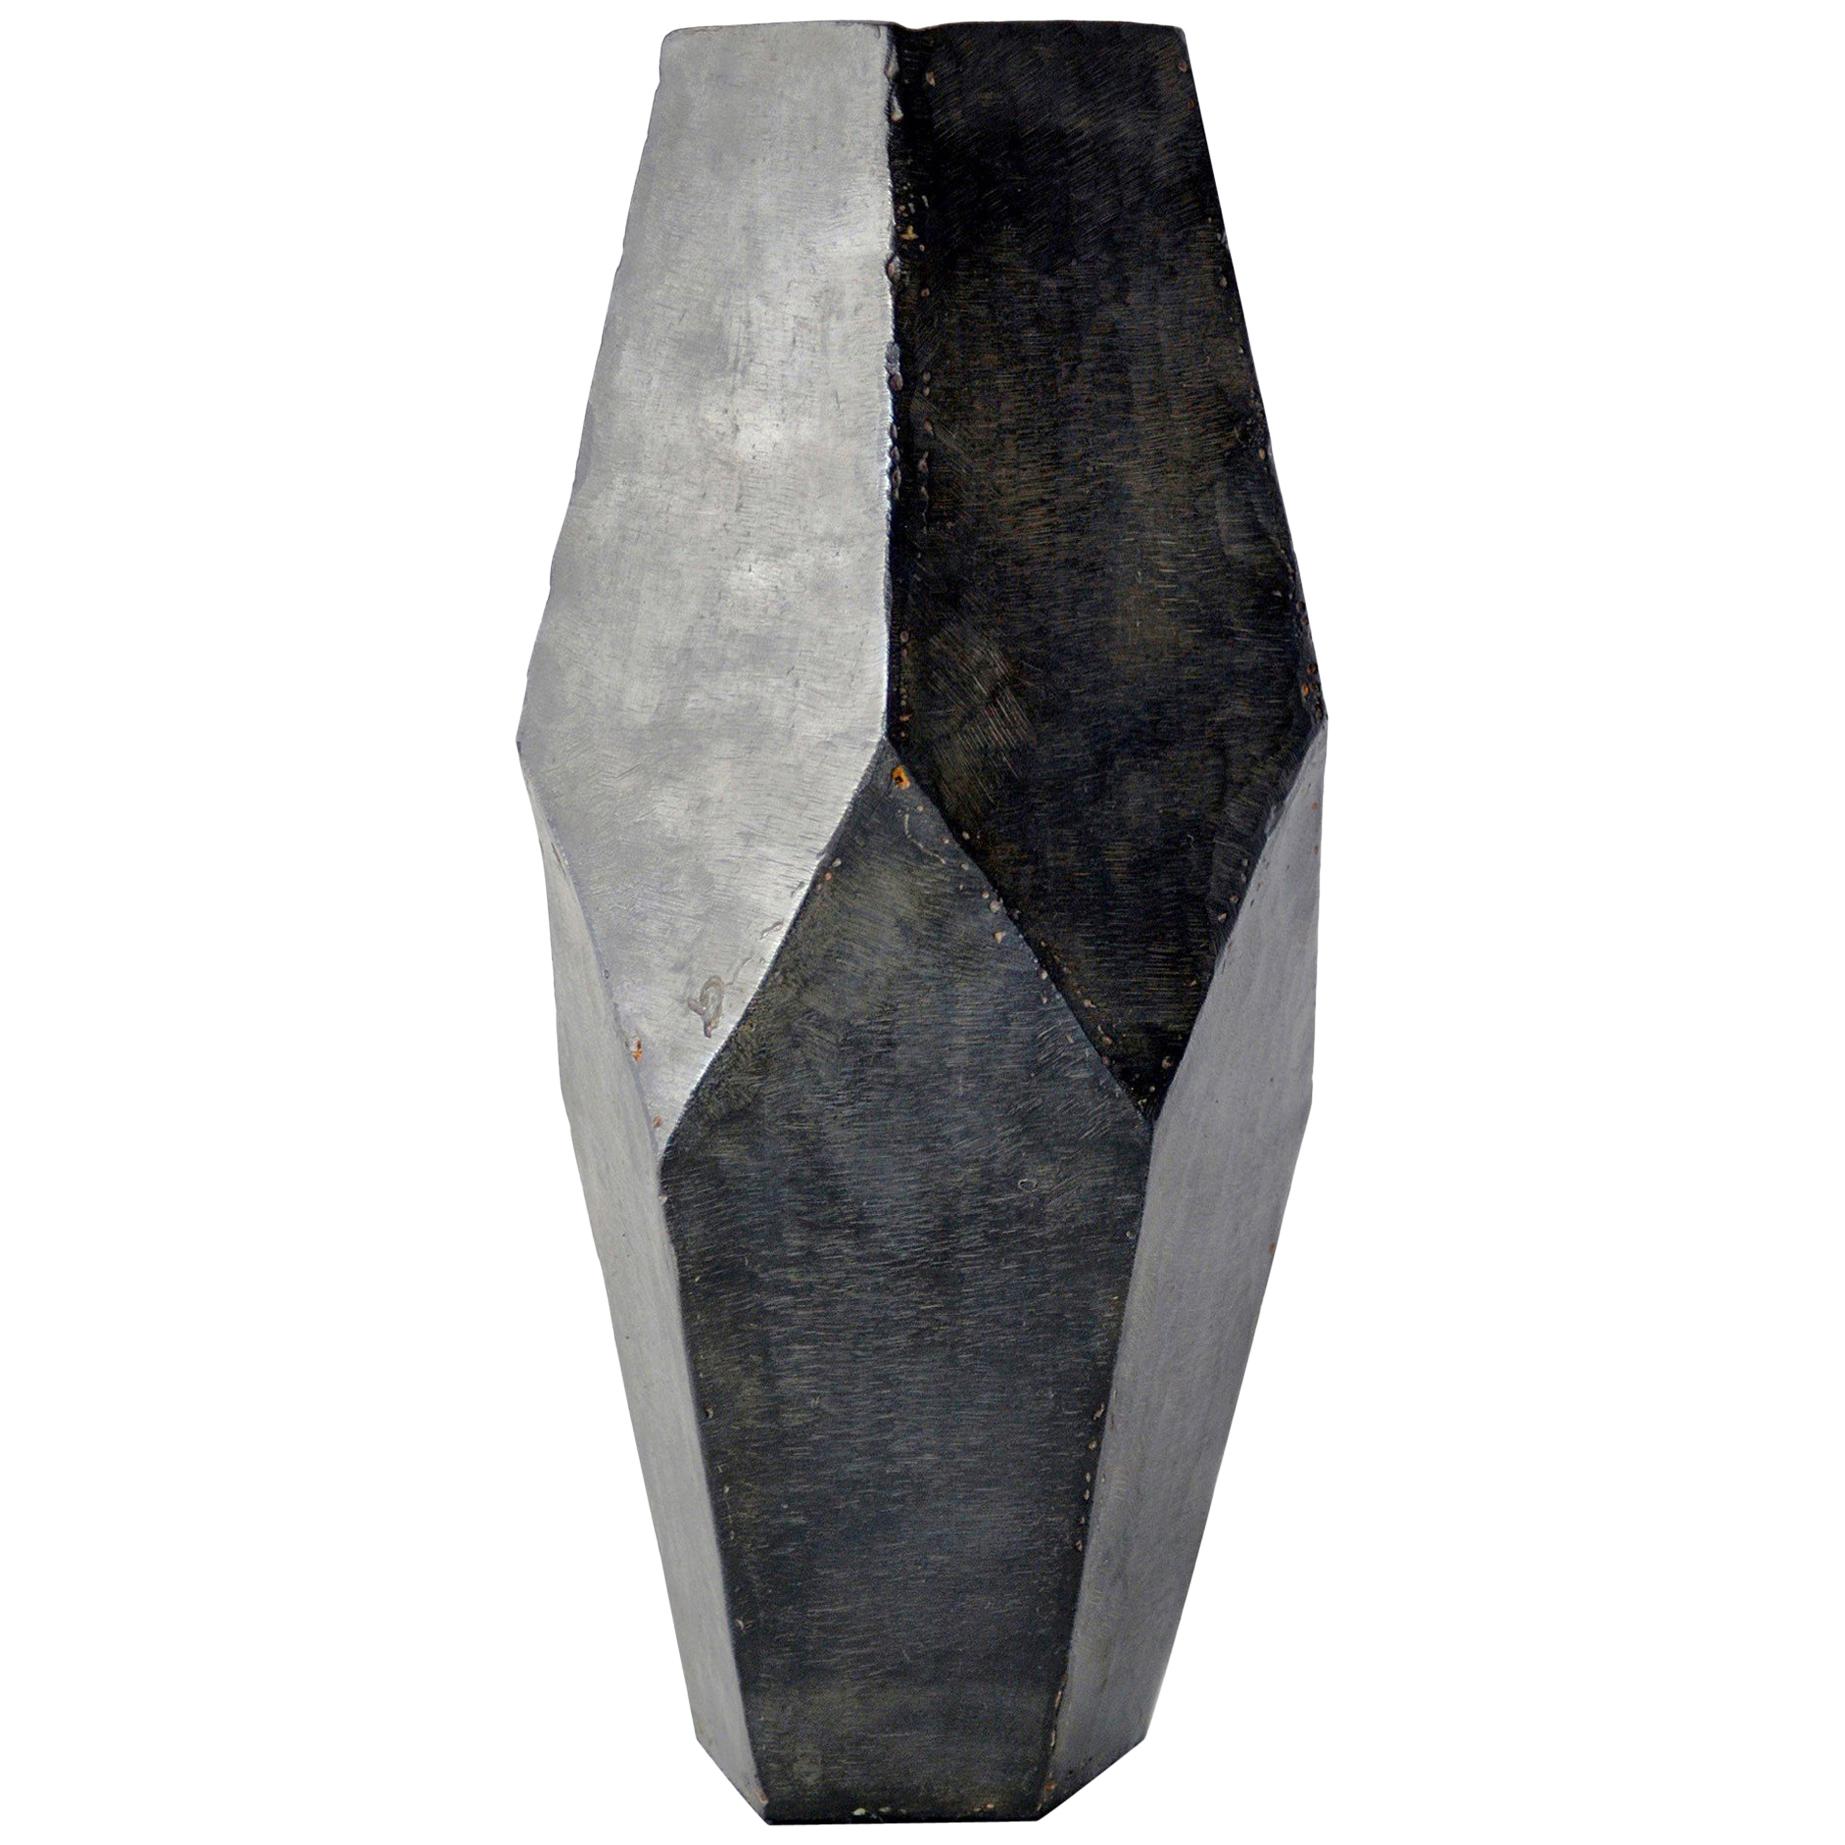 Geometric Vessel Sculpture Contemporary Stark Rough Carved Blackened Waxed Iron